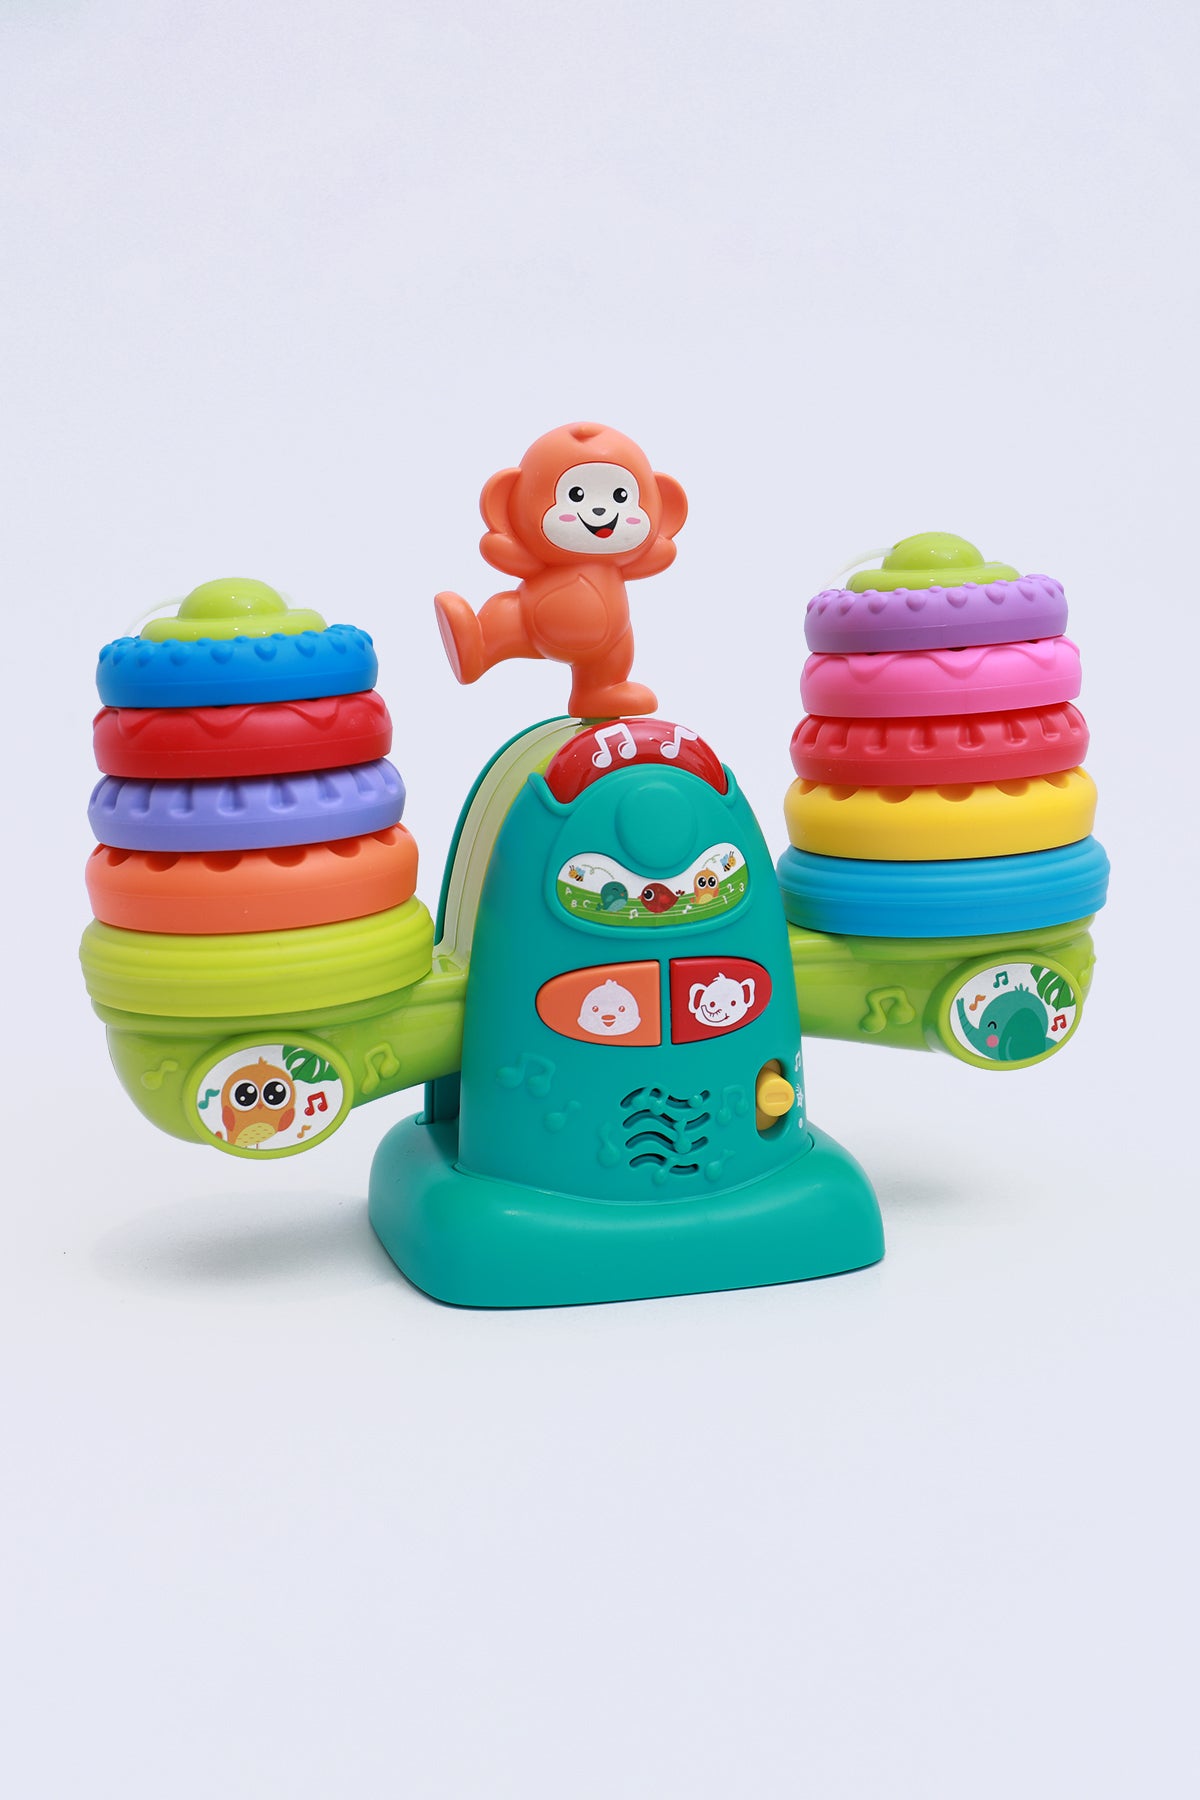 Colorful Seesaw Stacker Toy